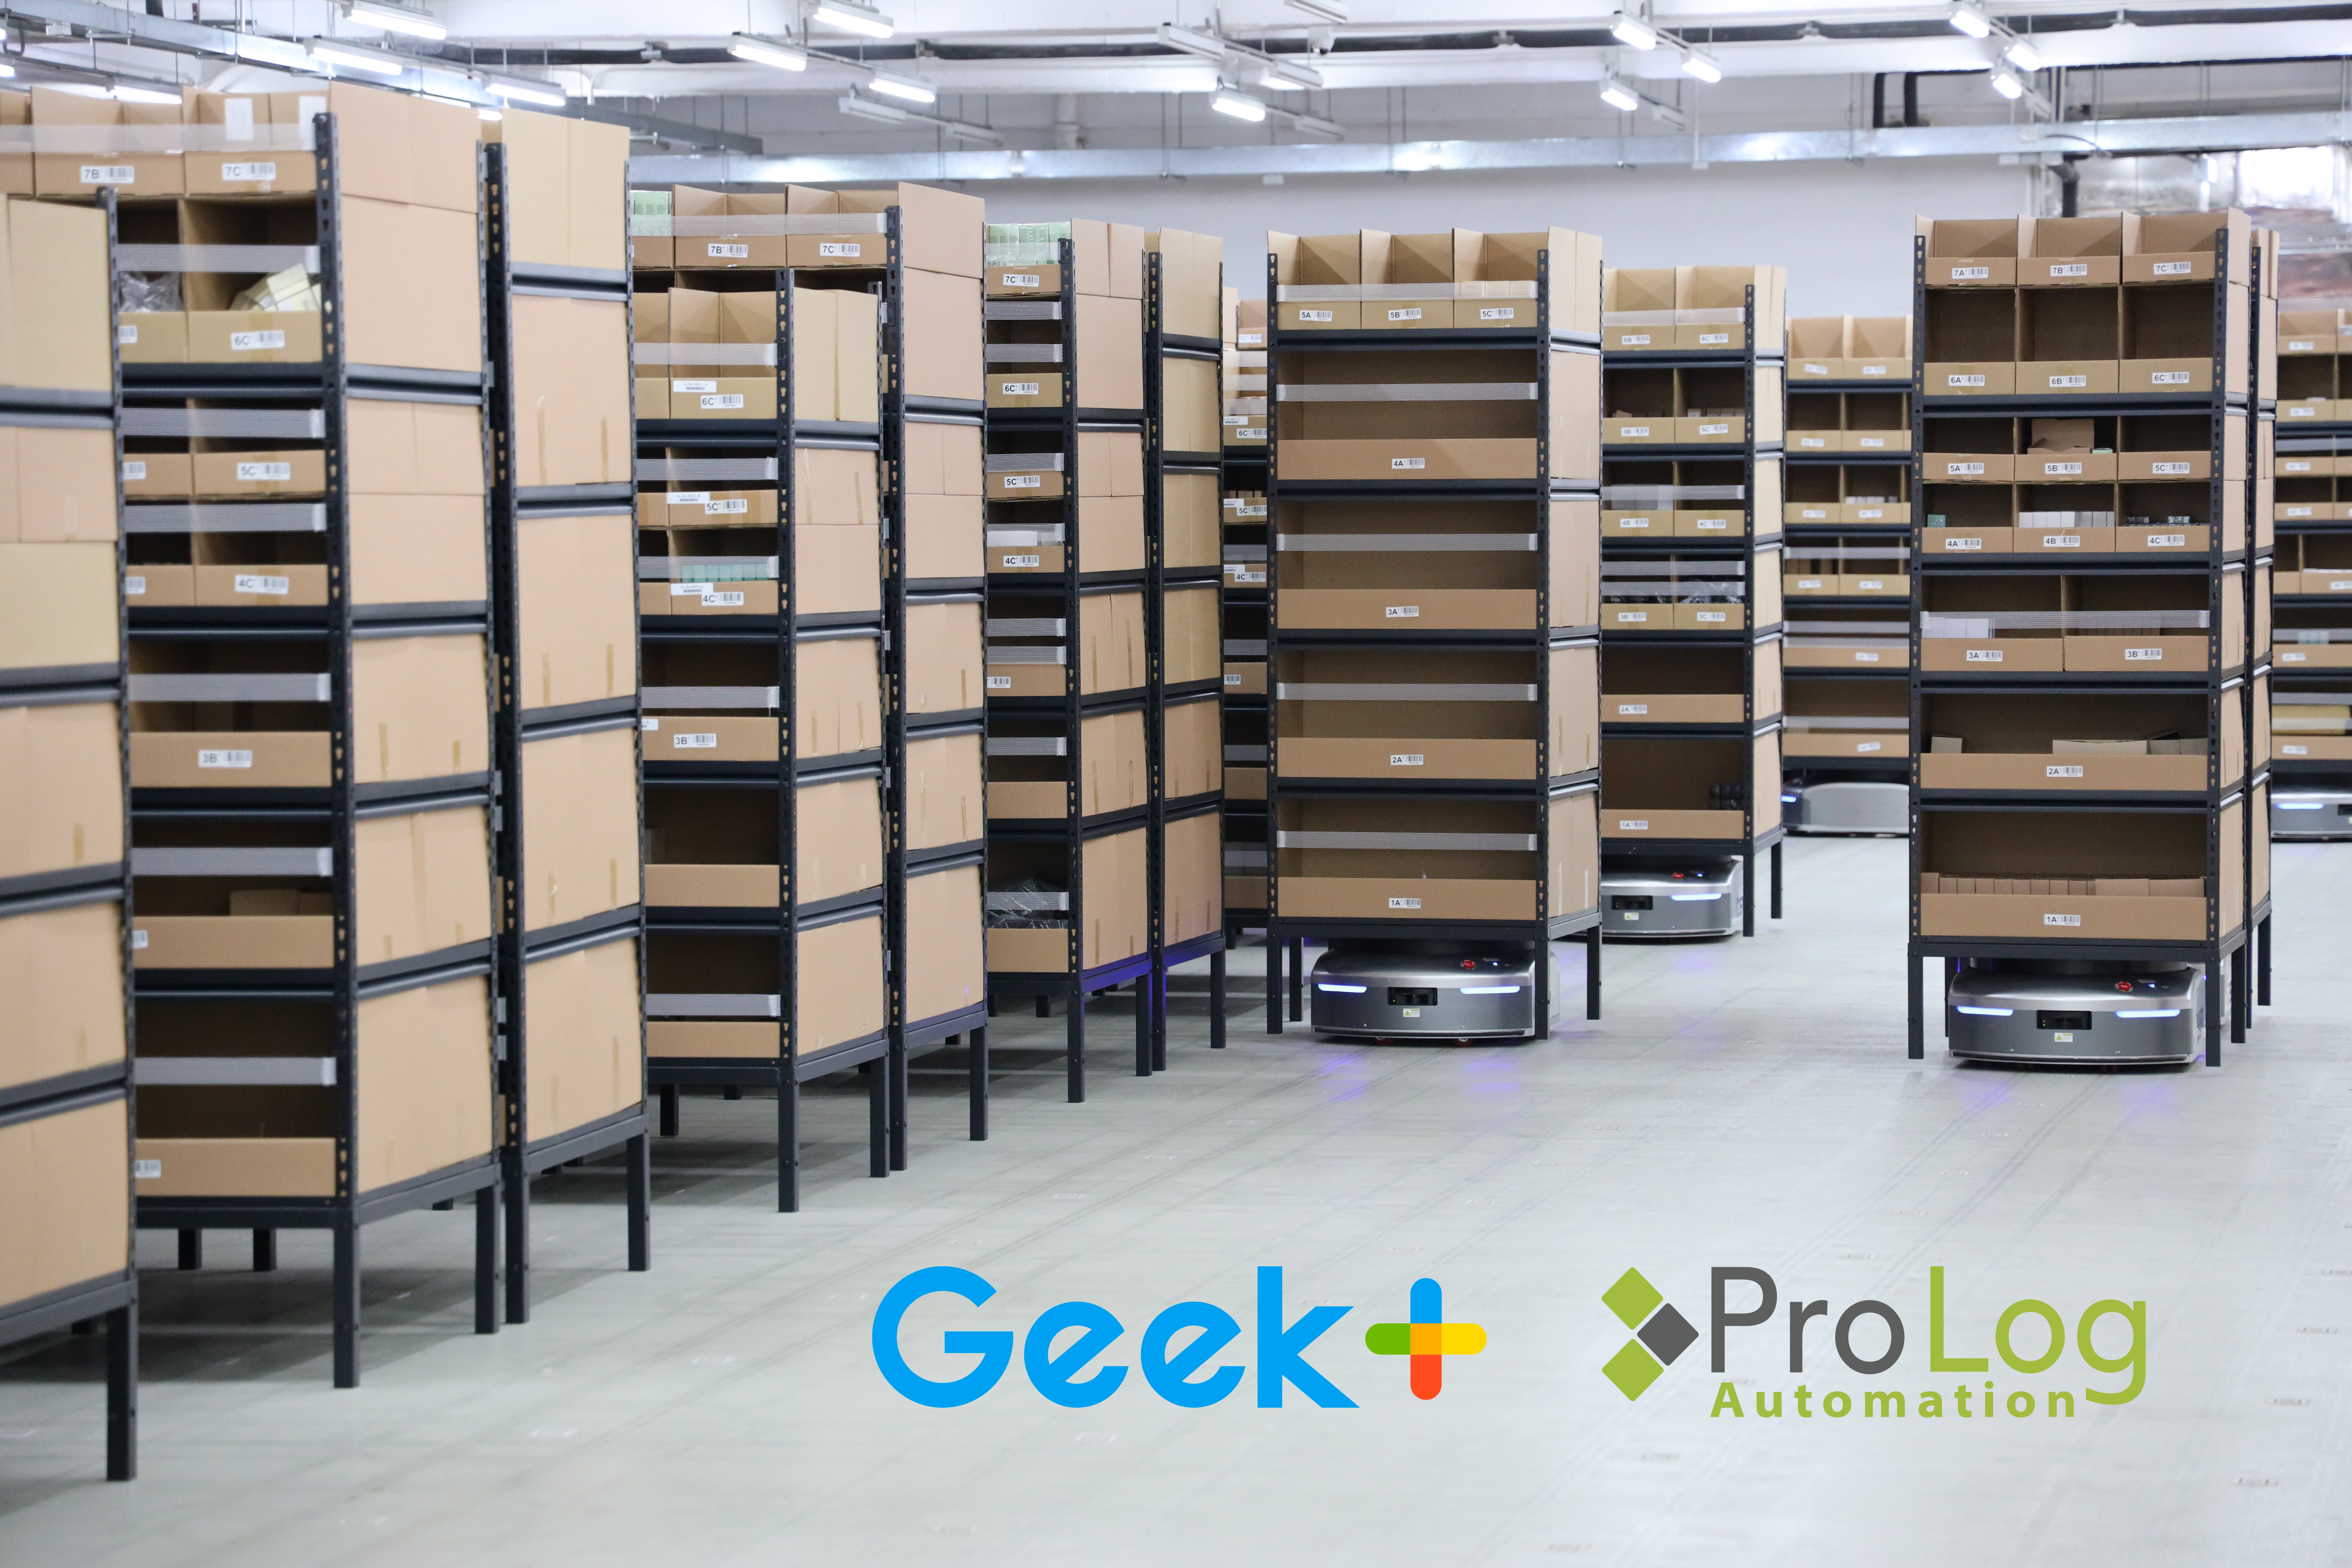 Geek+ and ProLog Automation announce cooperation